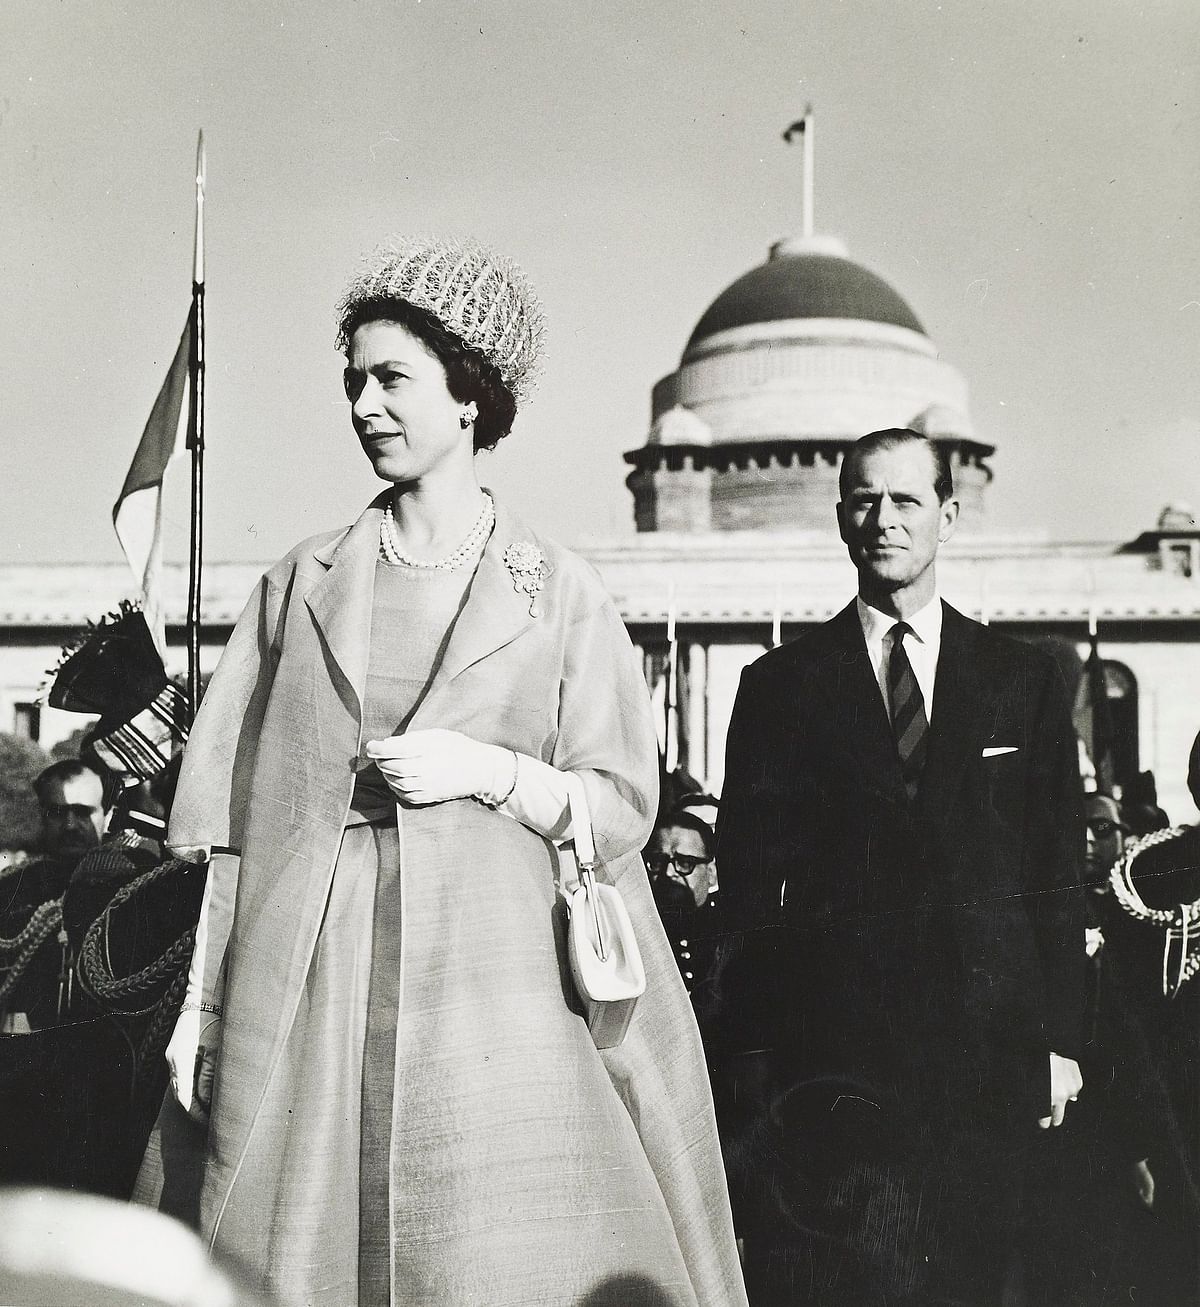 Queen Elizabeth II was the first reigning British monarch to visit India in 50 years in 1961.